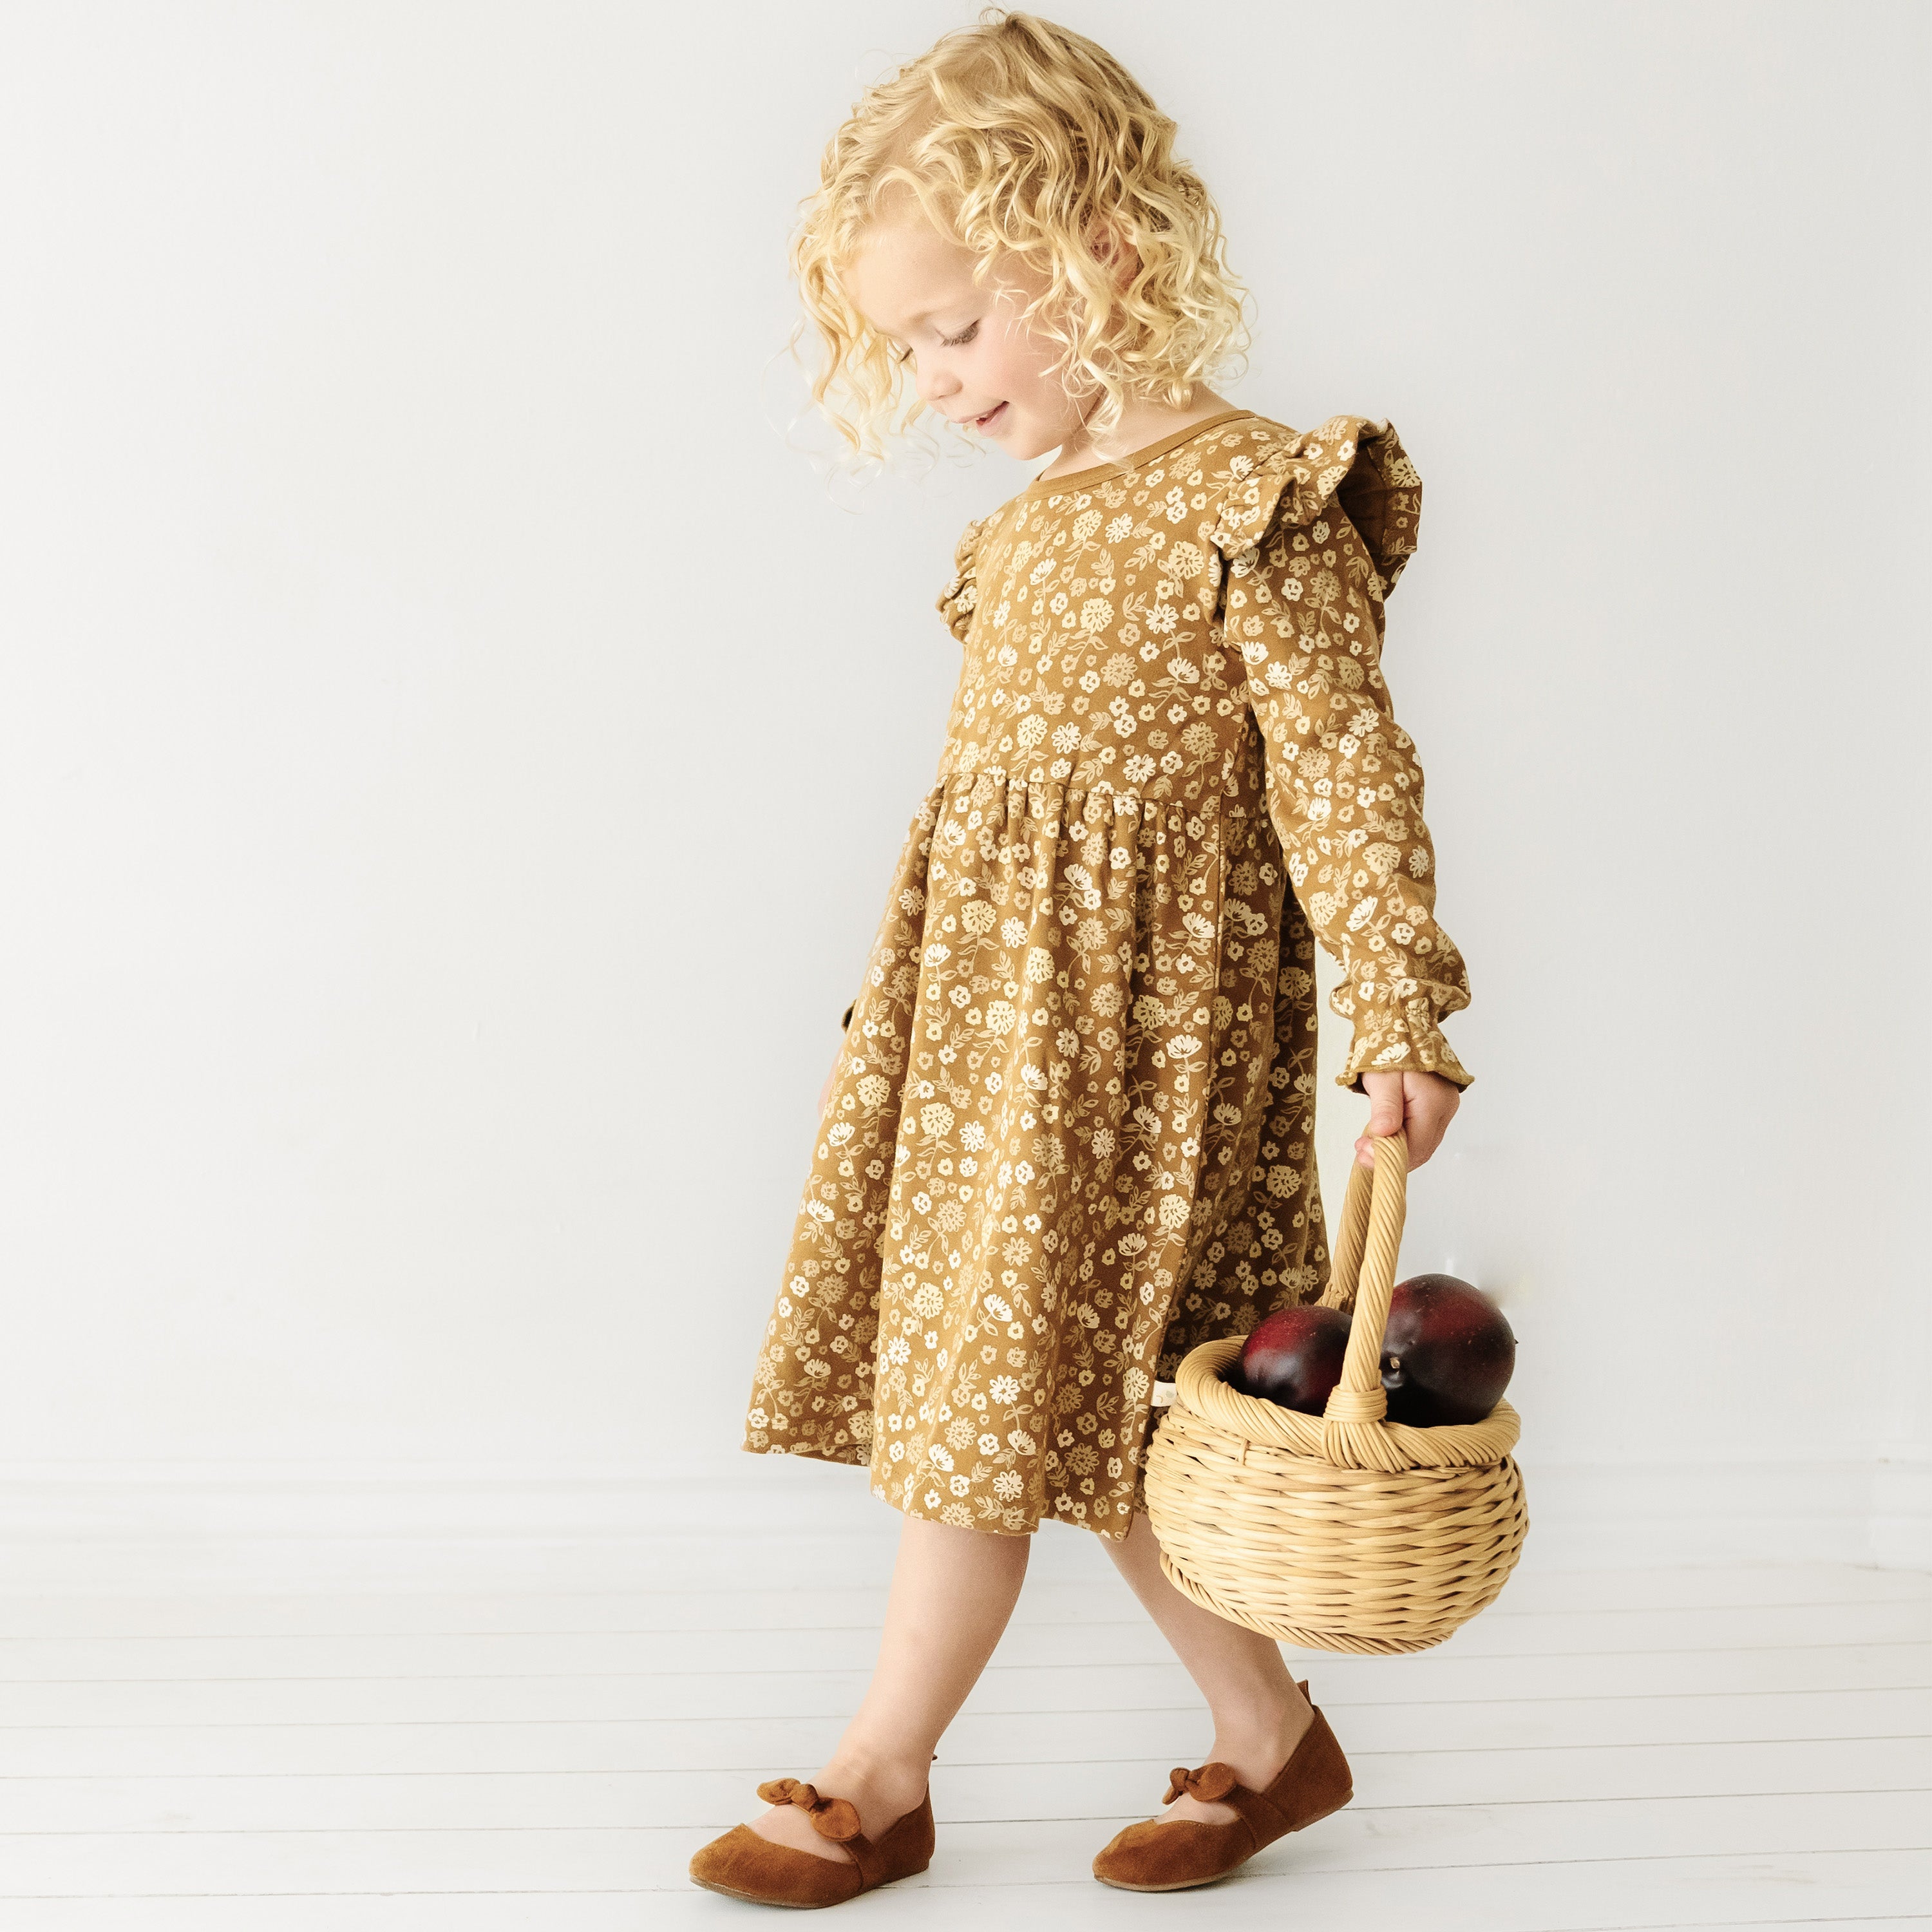 A young girl with curly blonde hair, wearing an Organic Girls Wildflower floral print dress and brown shoes, walks while holding a wicker basket filled with apples.